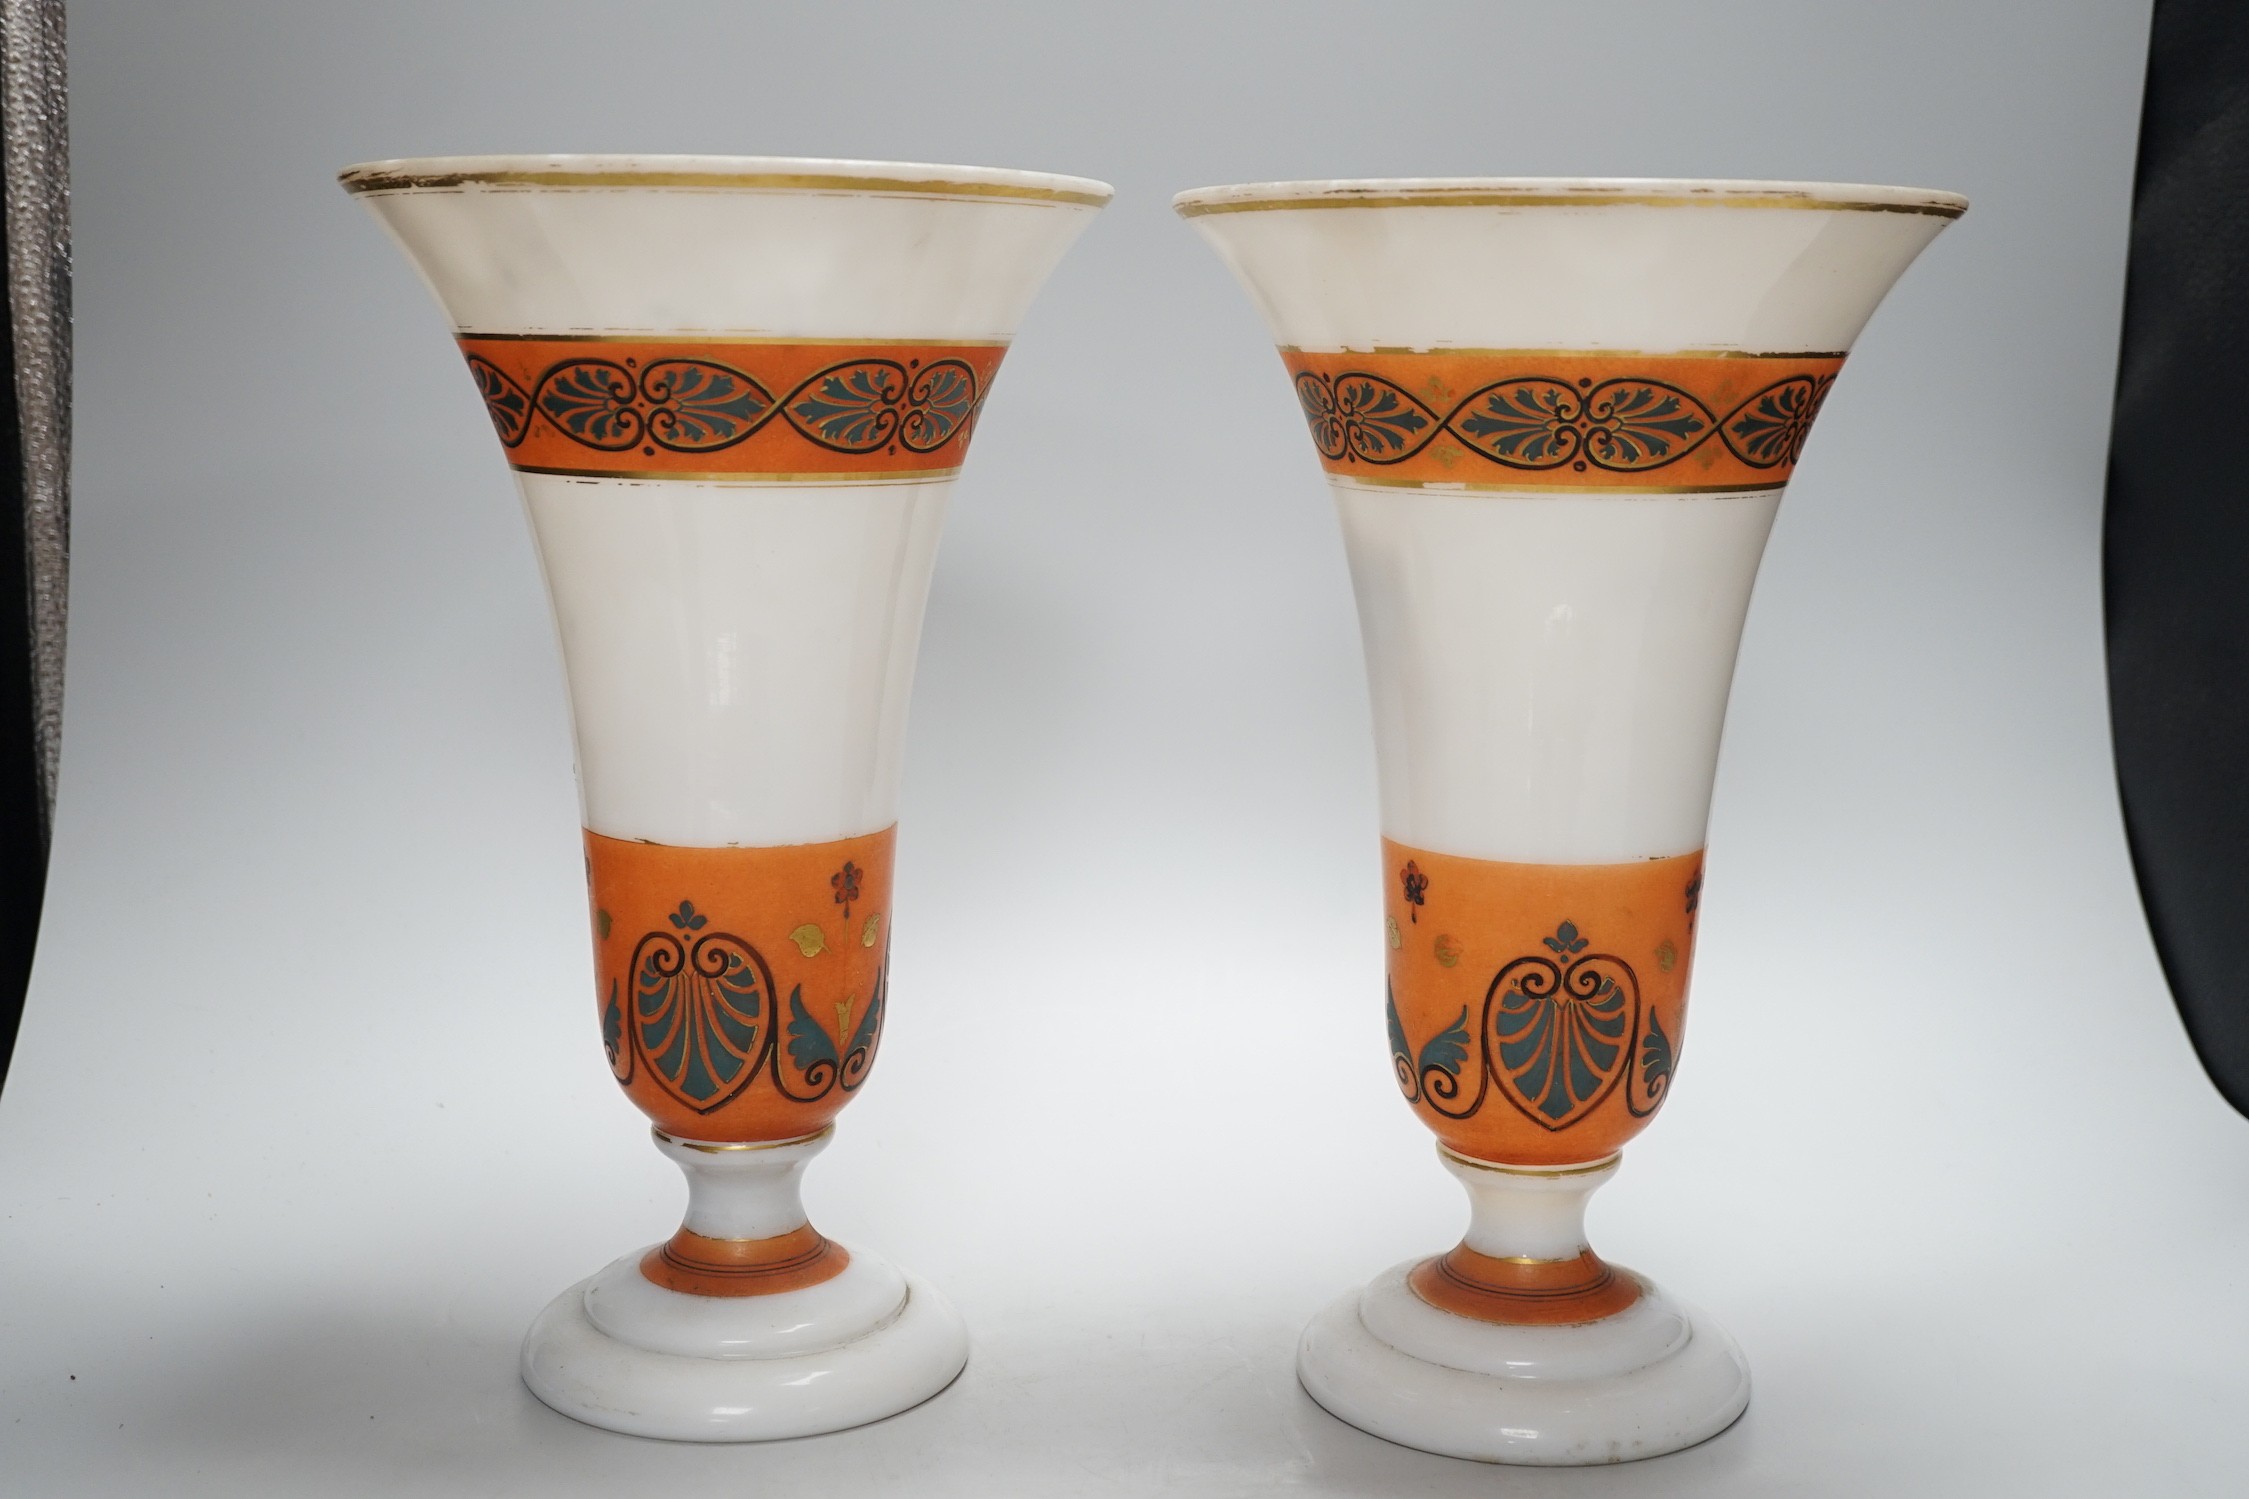 A pair of late 19th century French opaque glass ‘palmette’ vases, with orange decorative bands, 30cms high